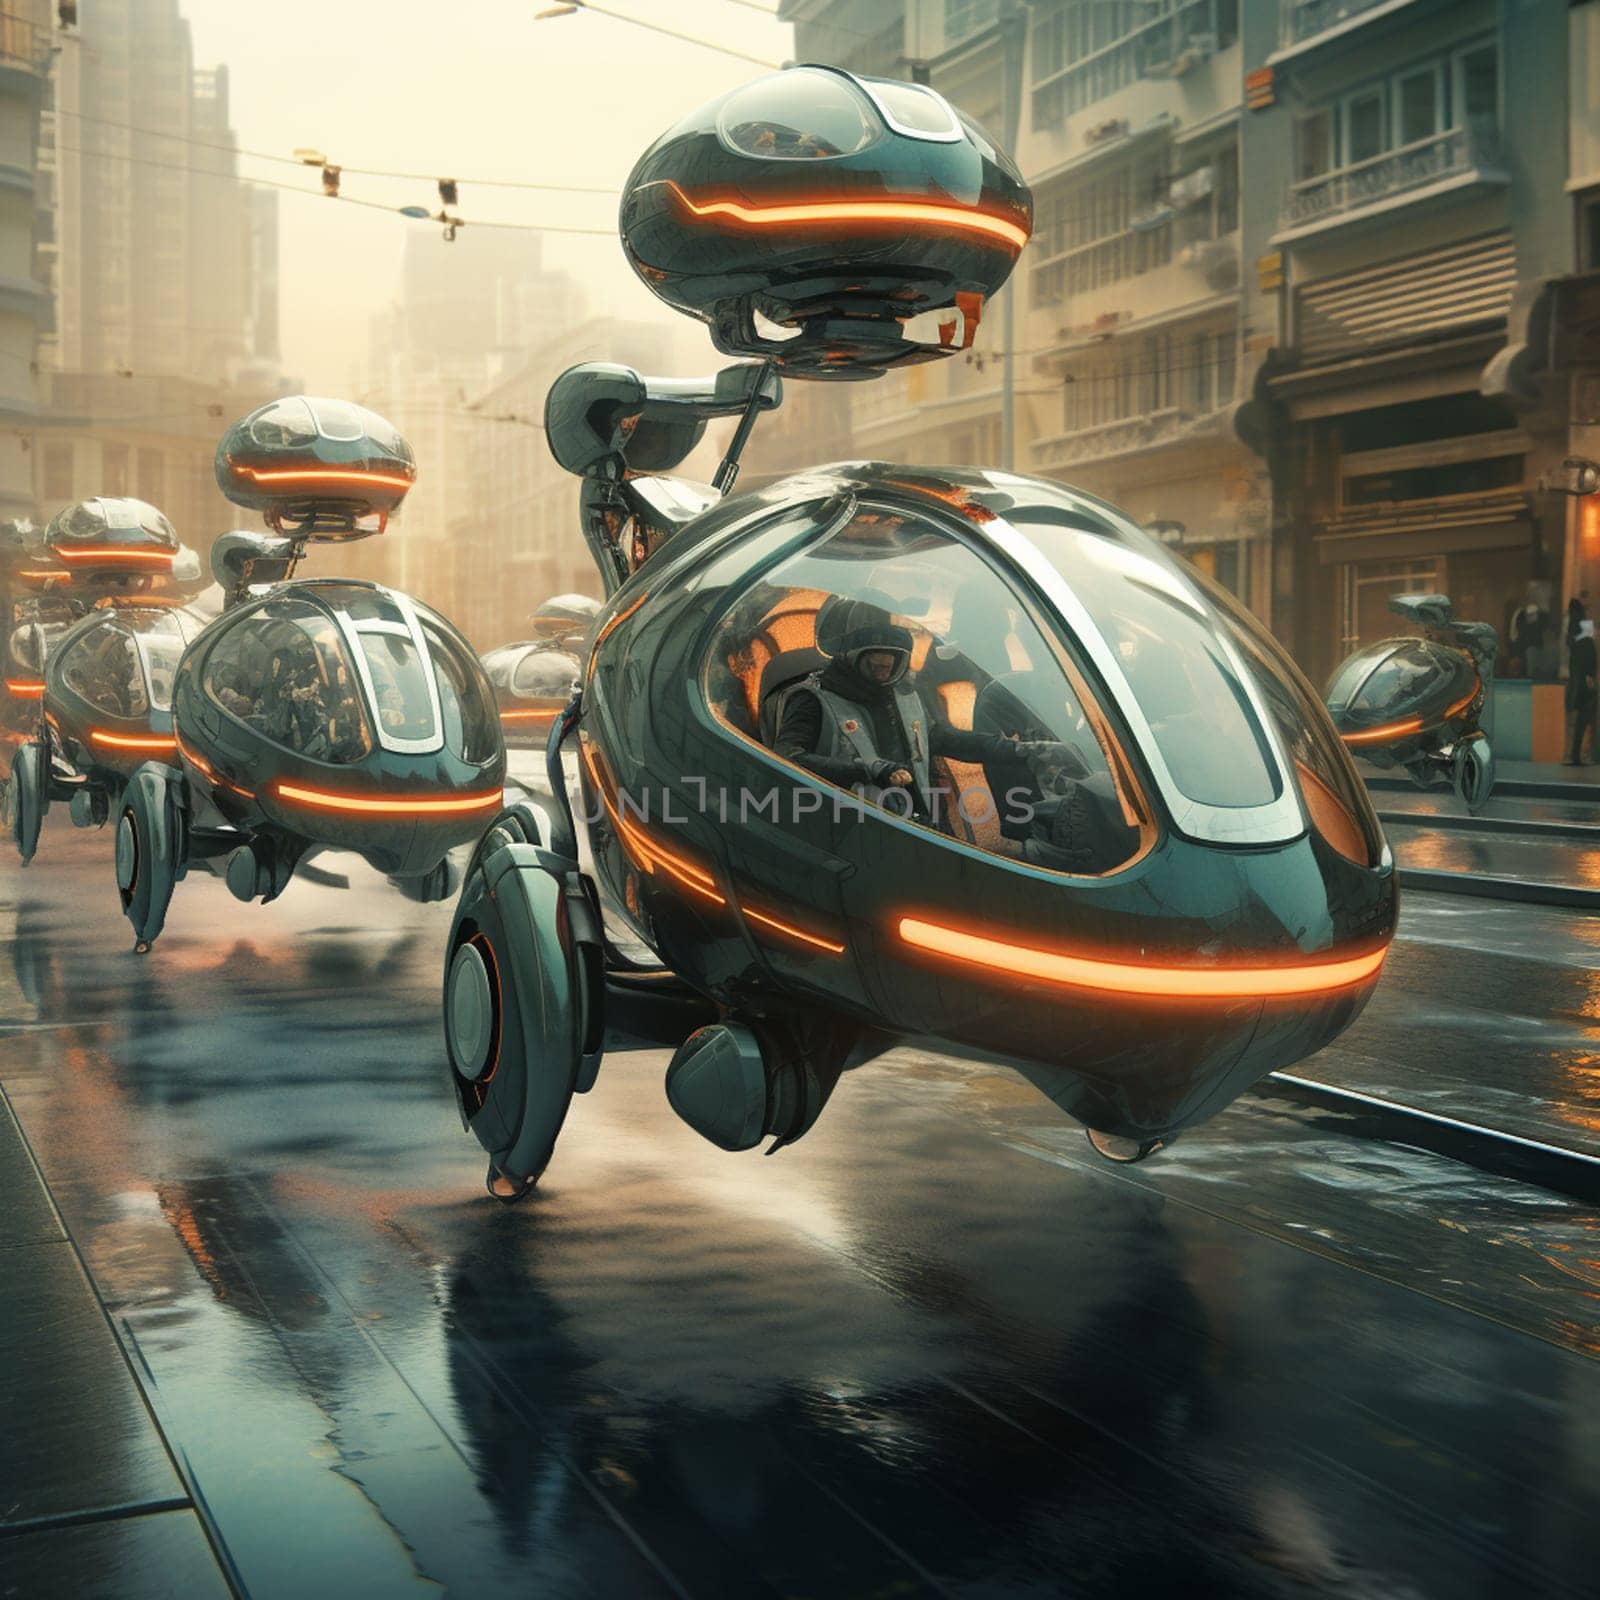 Concept of a passenger drone. City transport. Air taxi. 3d illustration by Andelov13